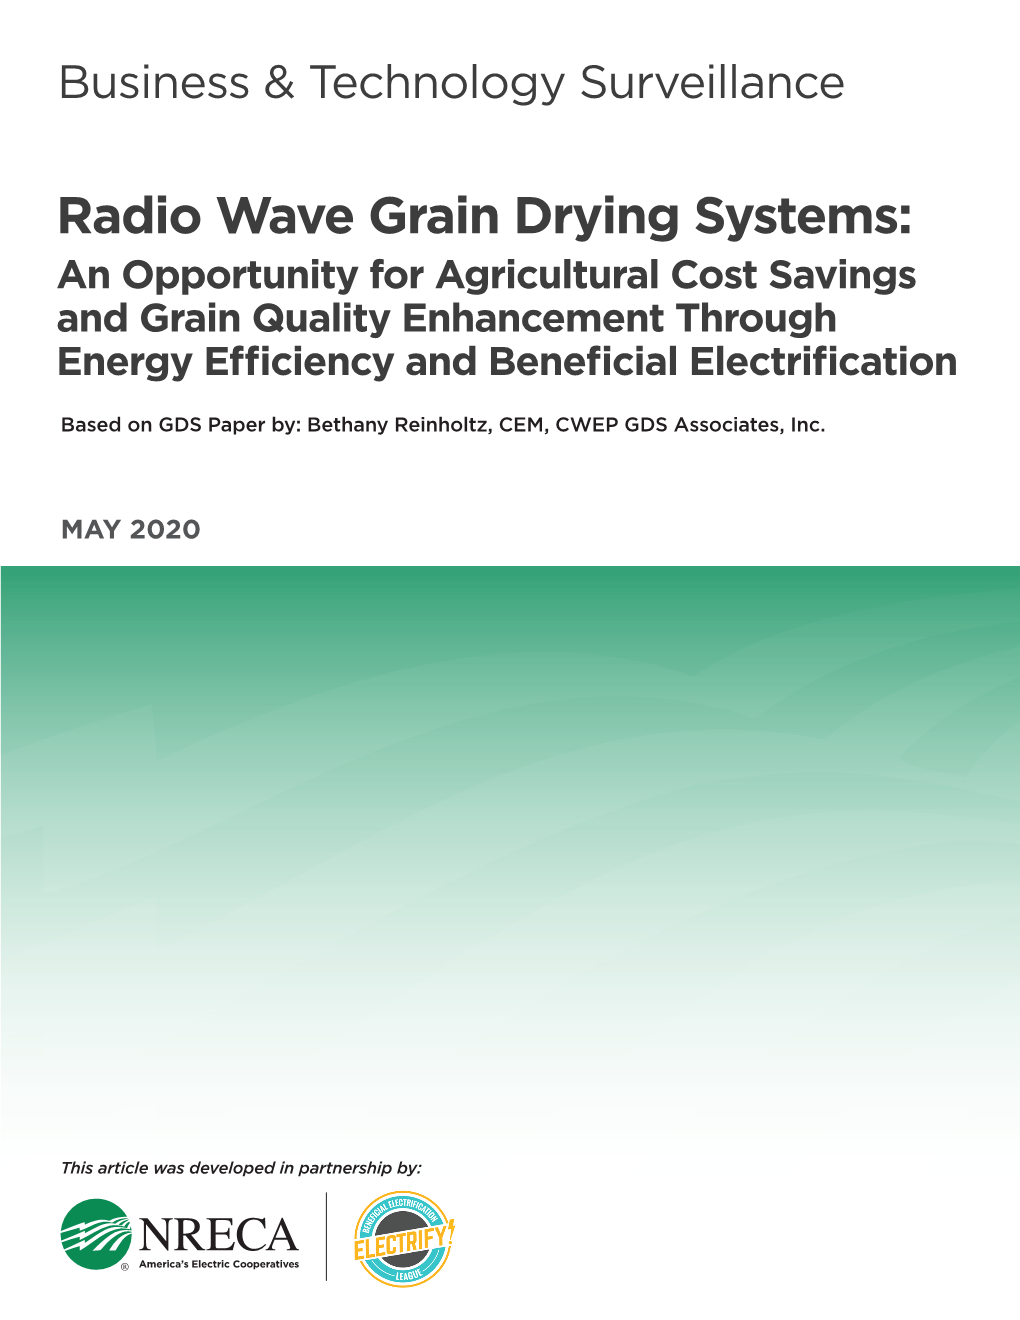 Radio Wave Grain Drying Systems: an Opportunity for Agricultural Cost Savings and Grain Quality Enhancement Through Energy Efficiency and Beneficial Electrification